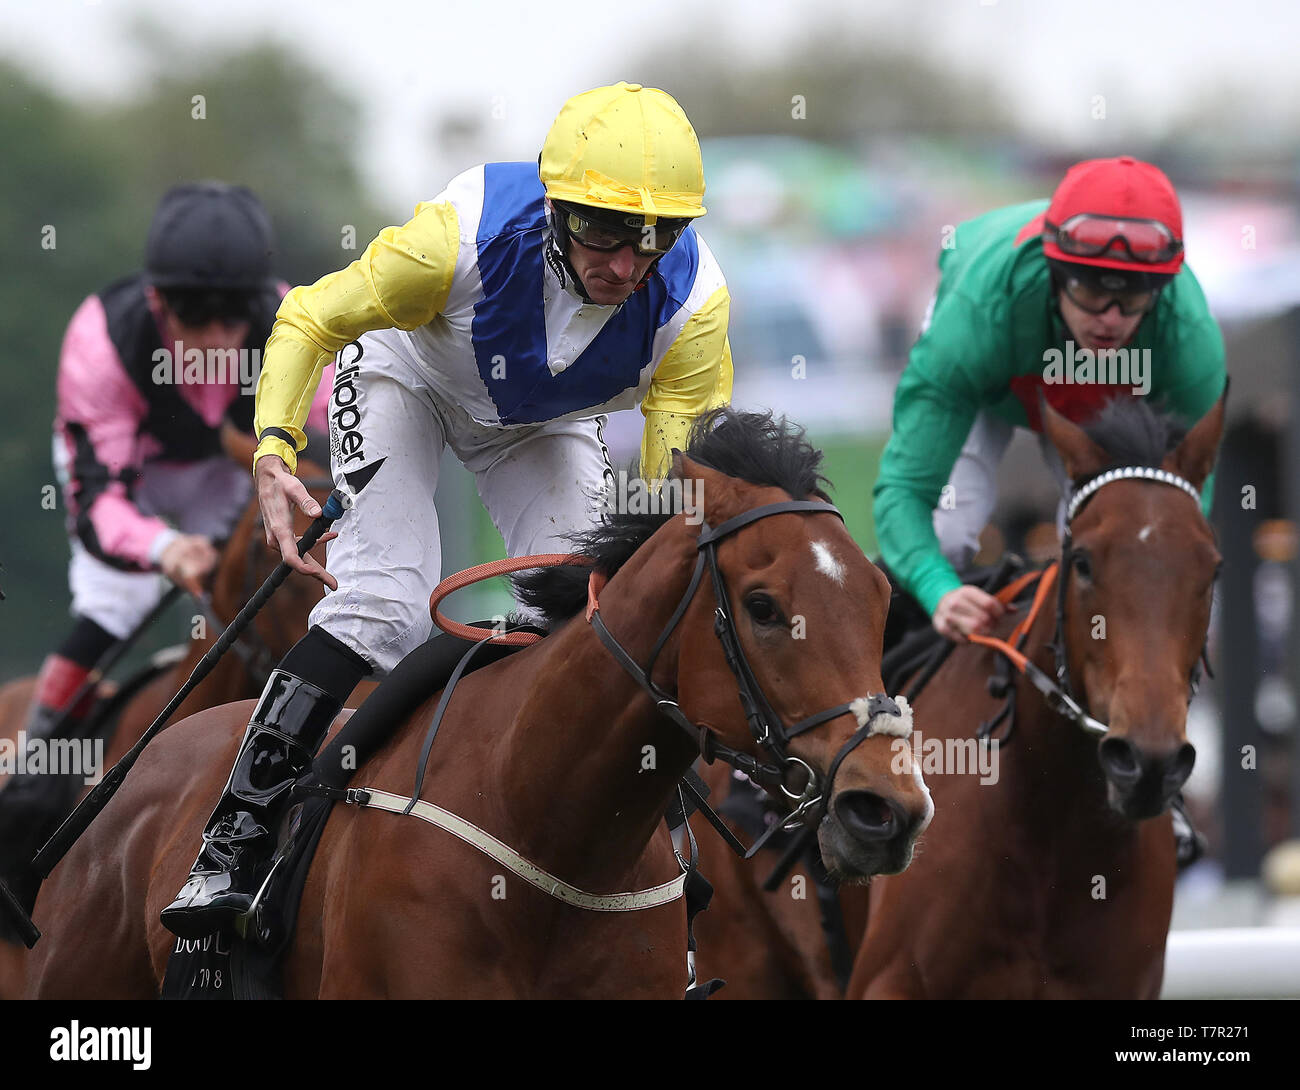 Leodis Dream (centre) riden by Daniel Tudhope wins The Boodles Diamond Handicap Stakes, during Boodles City Day at Chester Racecourse, Chester. Stock Photo